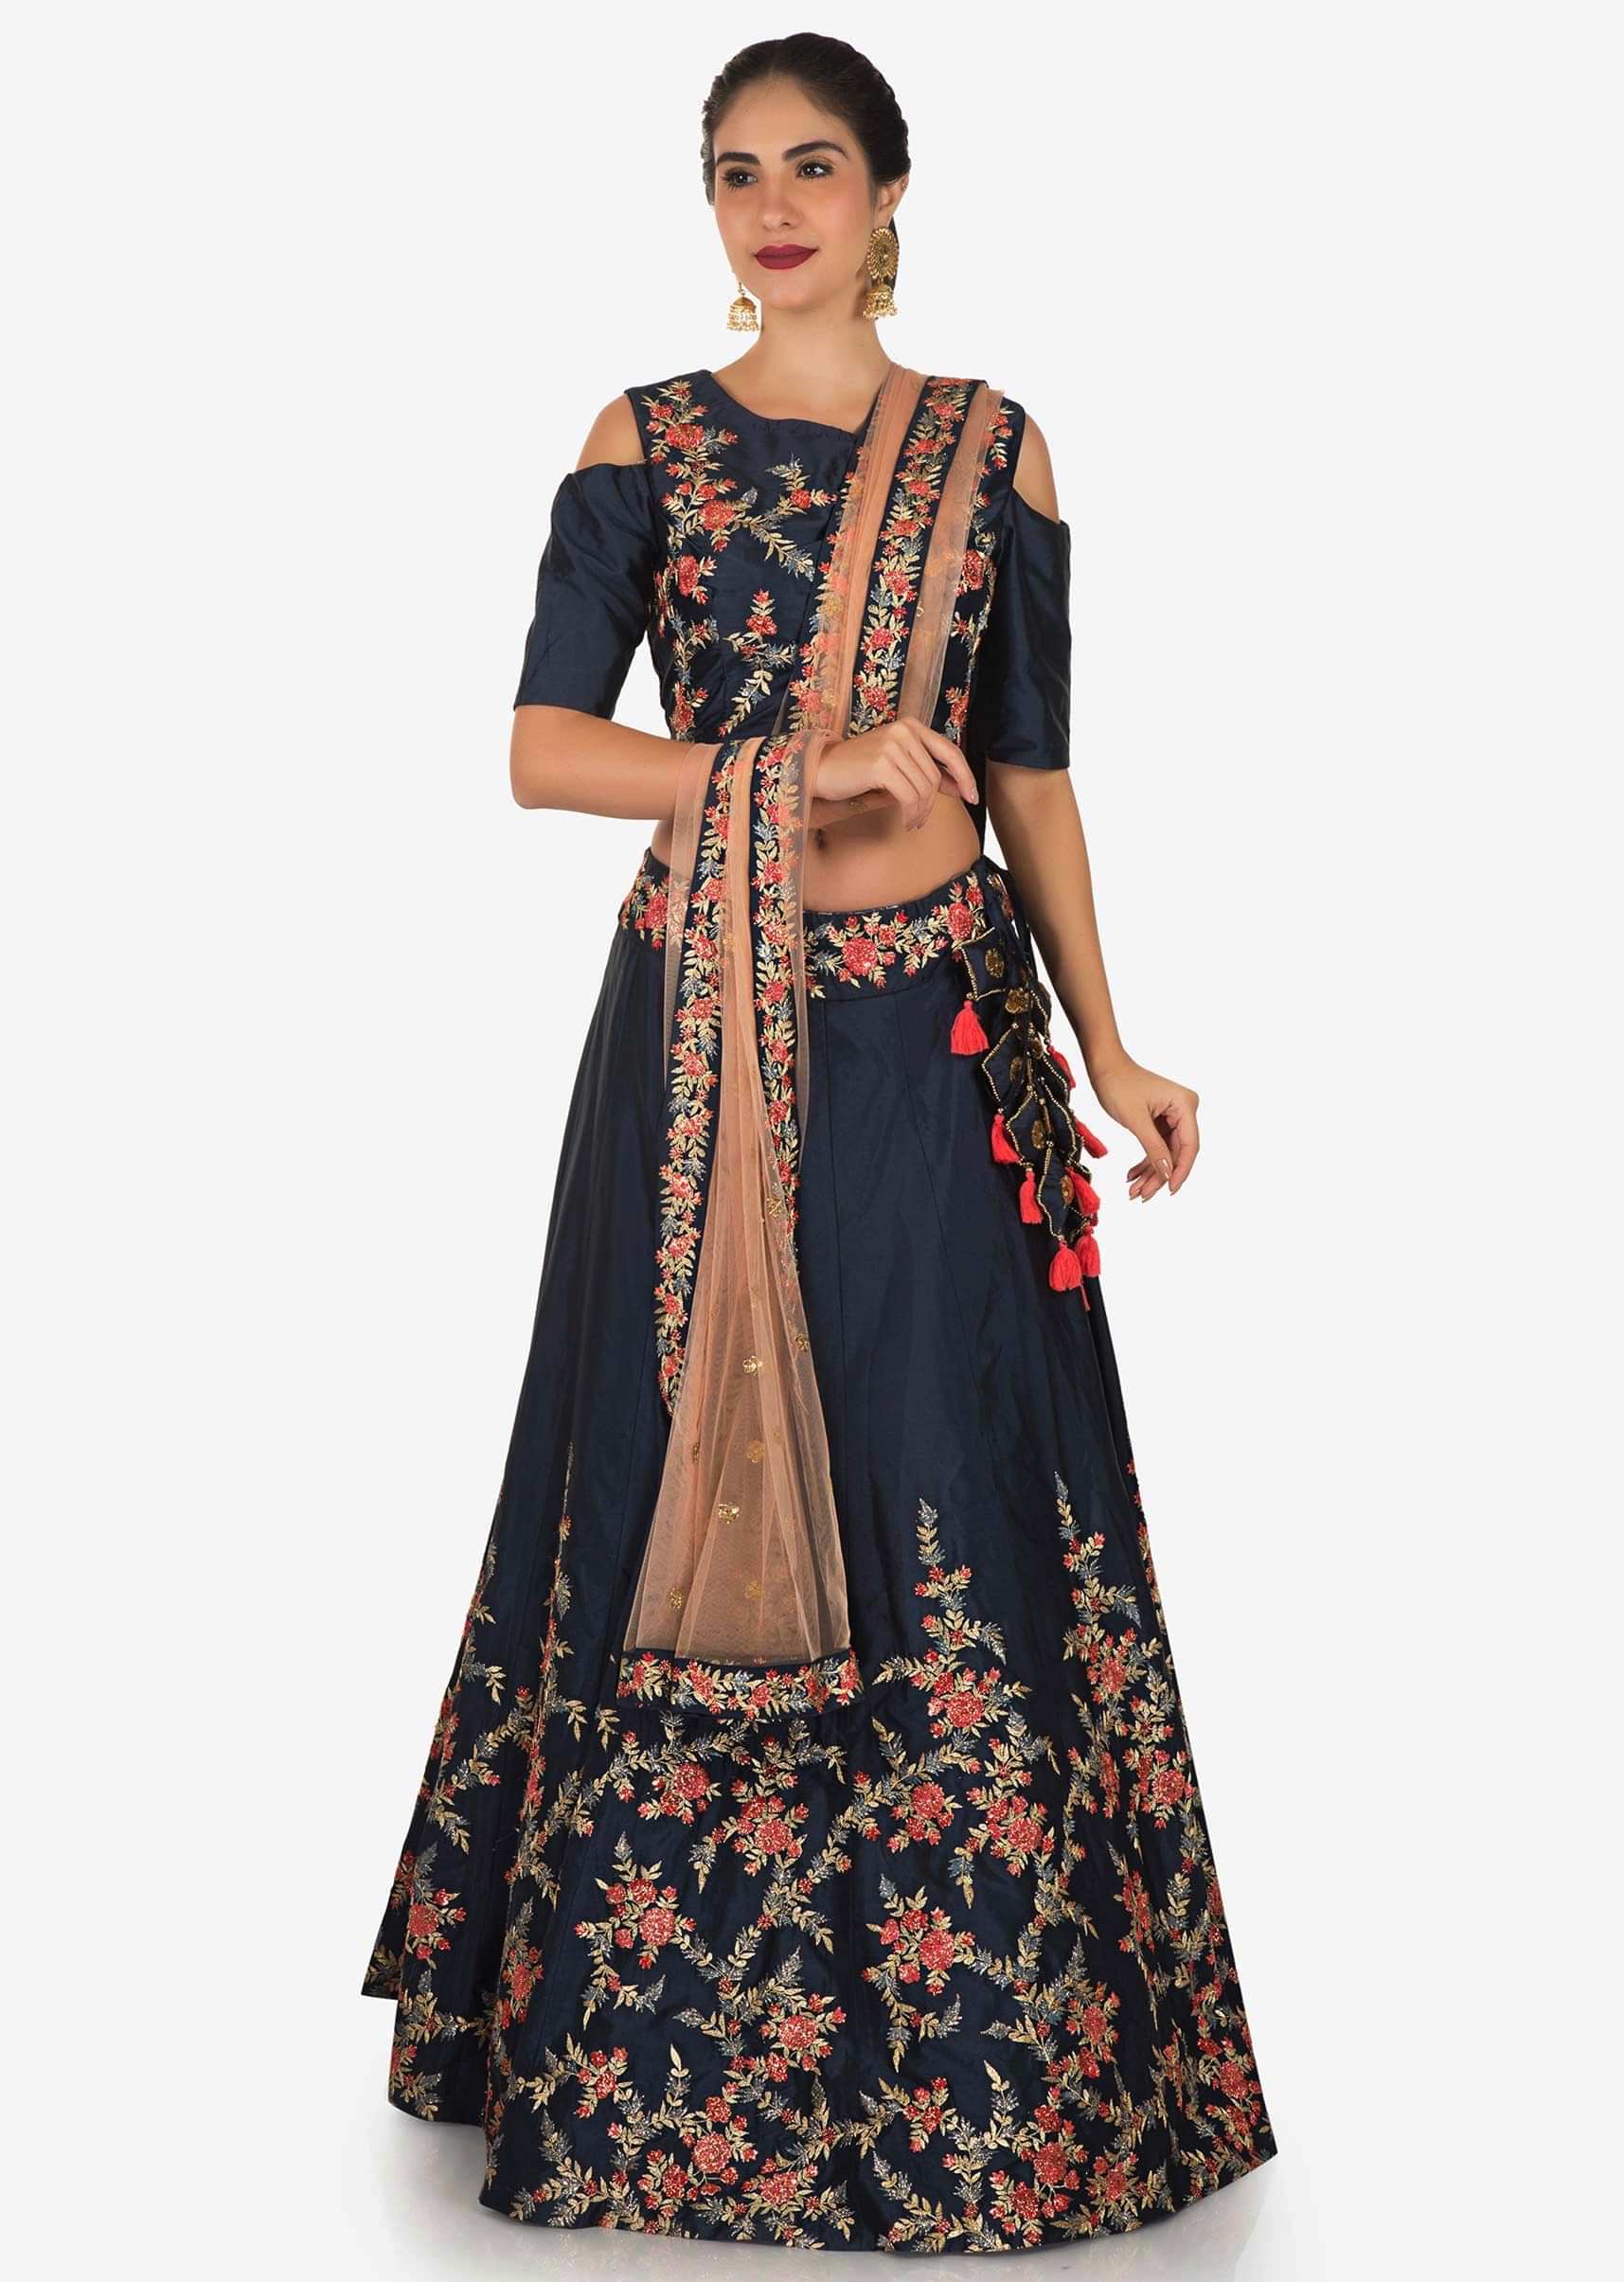 Mid Night Blue Lehenga In Resham Embroidery With Cold Shoulder Blouse Online - Kalki Fashion